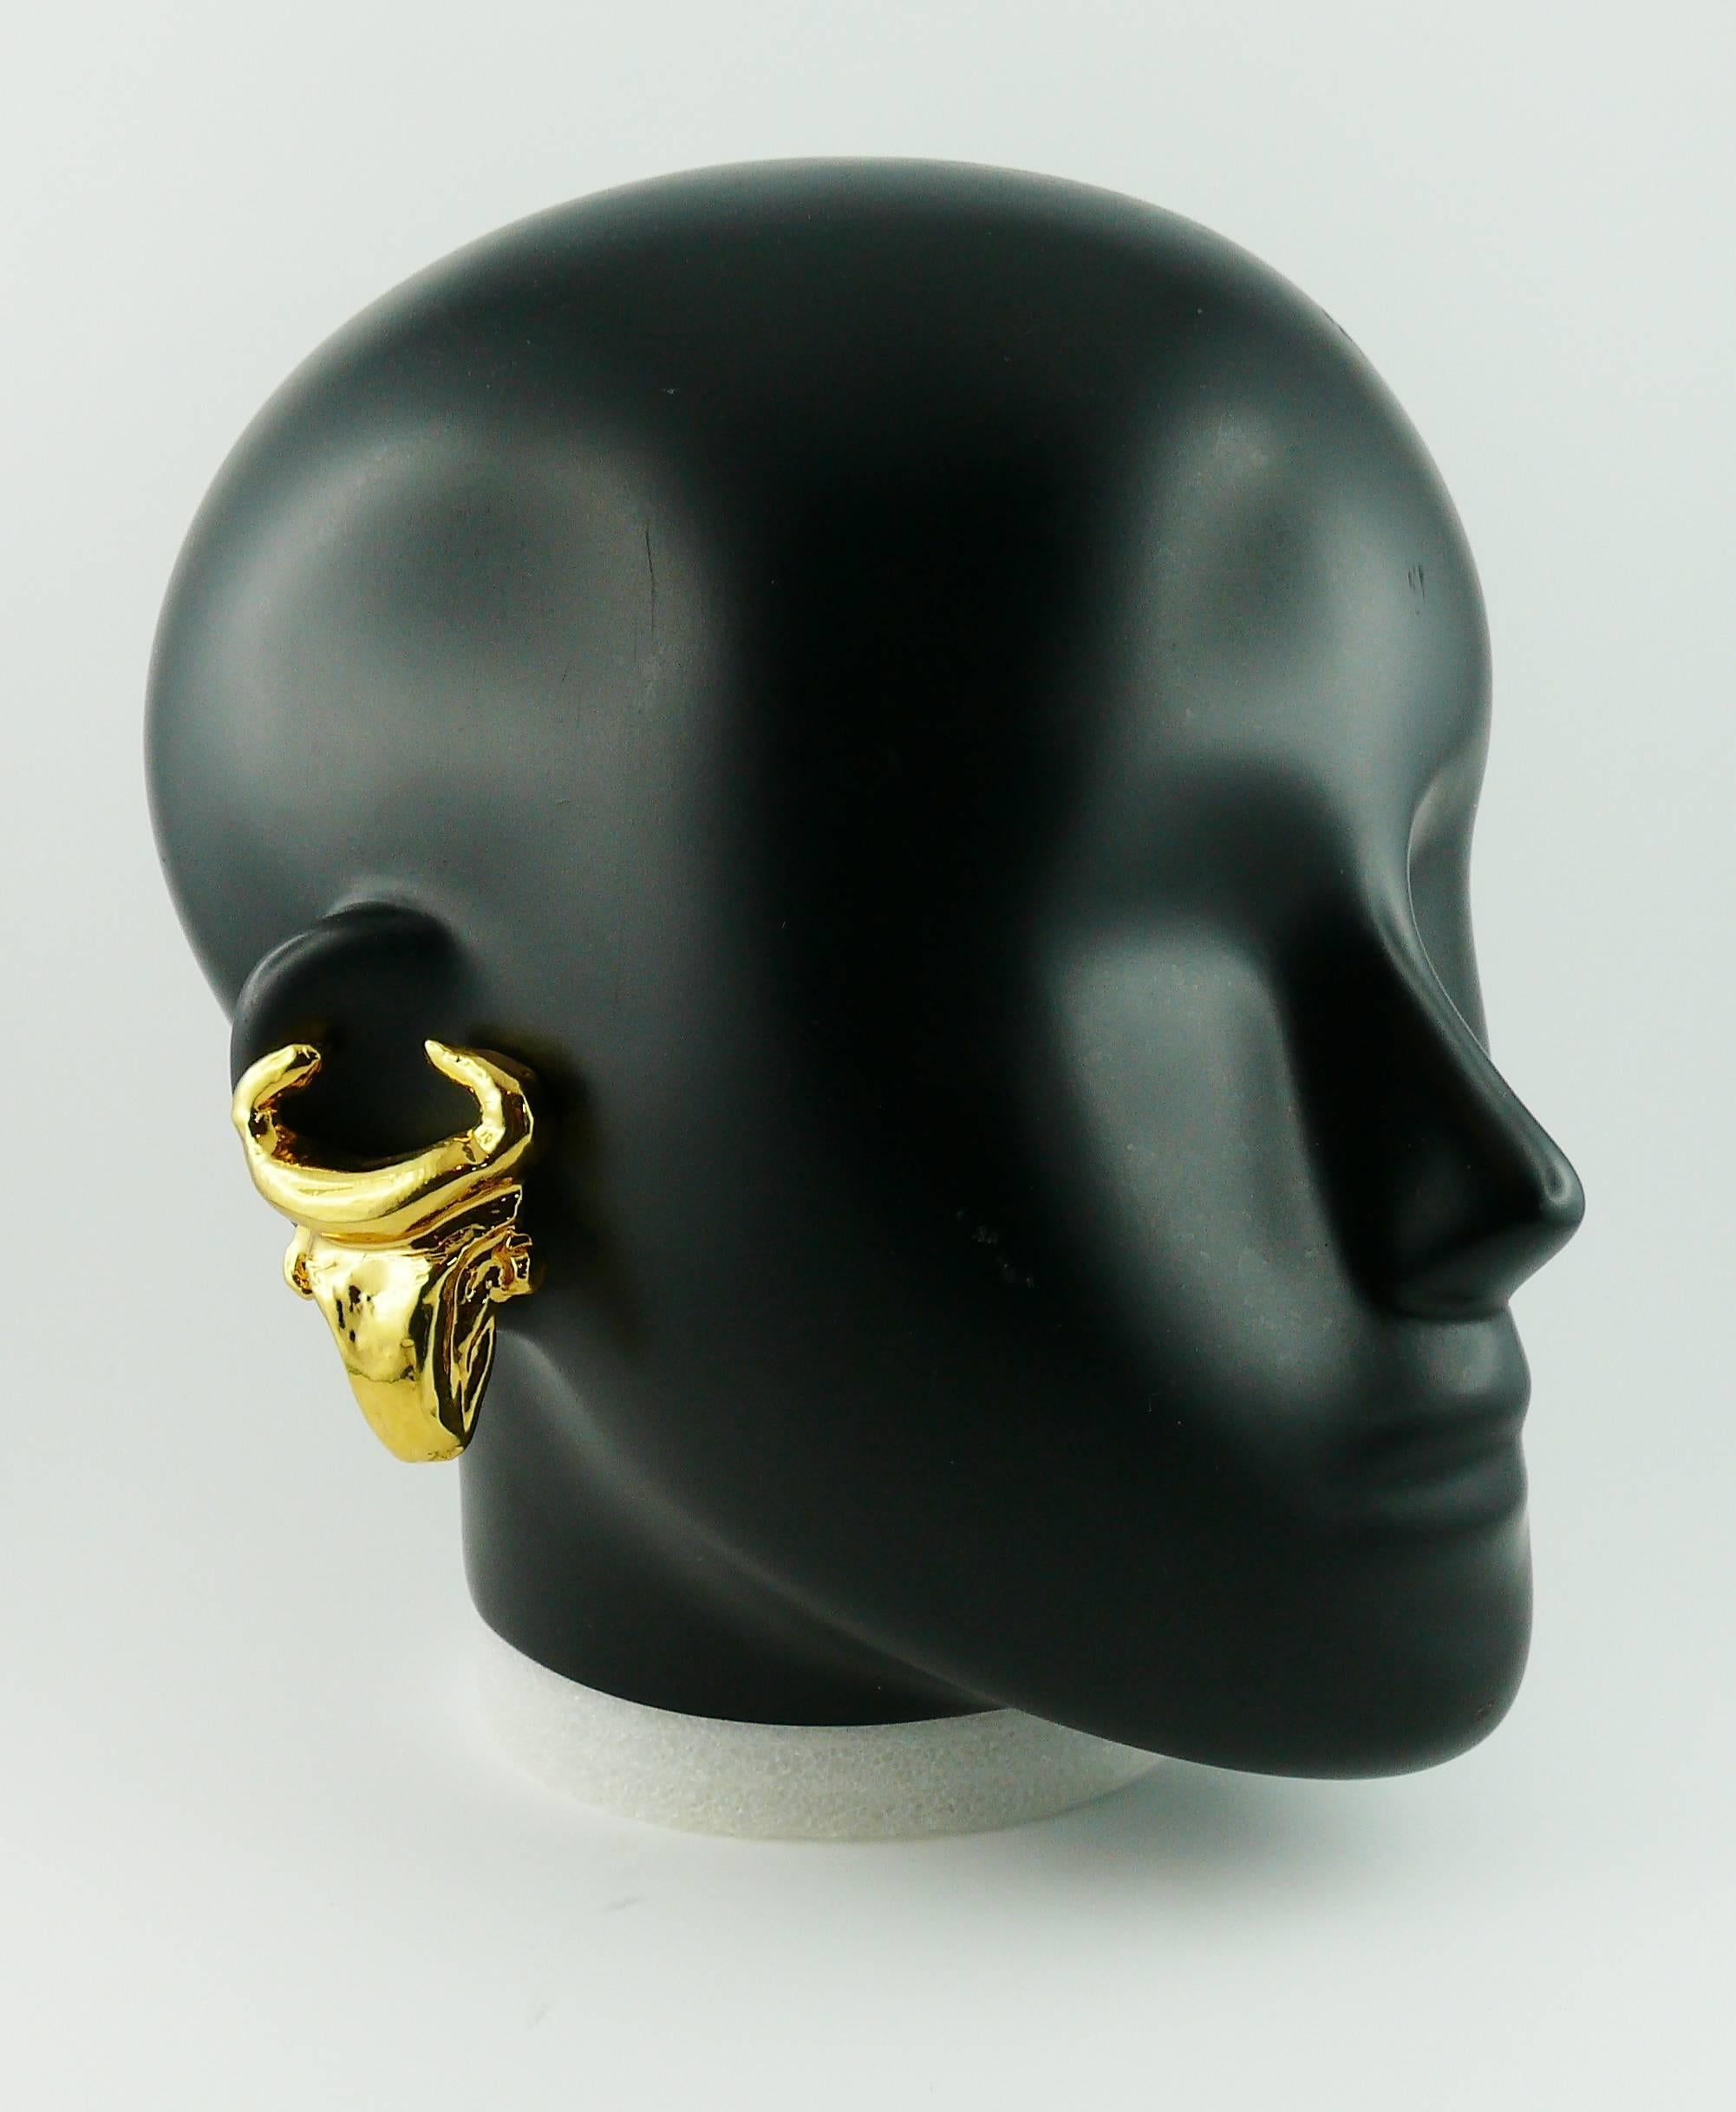 CHRISTIAN LACROIX vintage gold tone clip-on earrings featuring a stylized bull head.

Arlesian bullfighting iconic CHRISTIAN LACROIX design.

Marked CHRISTIAN LACROIX CL Made in France.

JEWELRY CONDITION CHART
- New or never worn : item is in